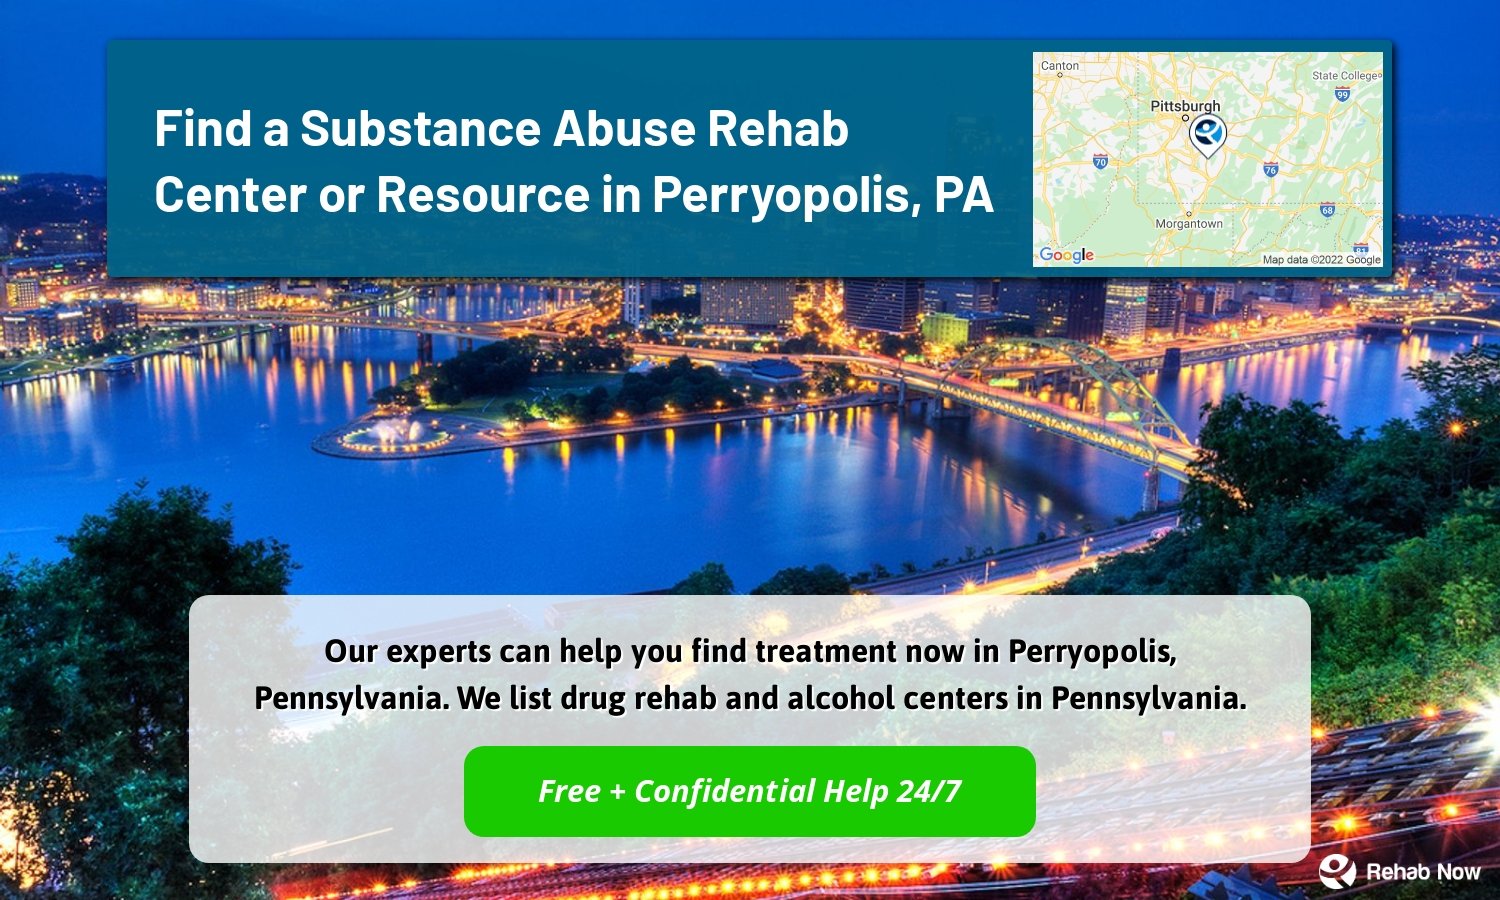 Our experts can help you find treatment now in Perryopolis, Pennsylvania. We list drug rehab and alcohol centers in Pennsylvania.